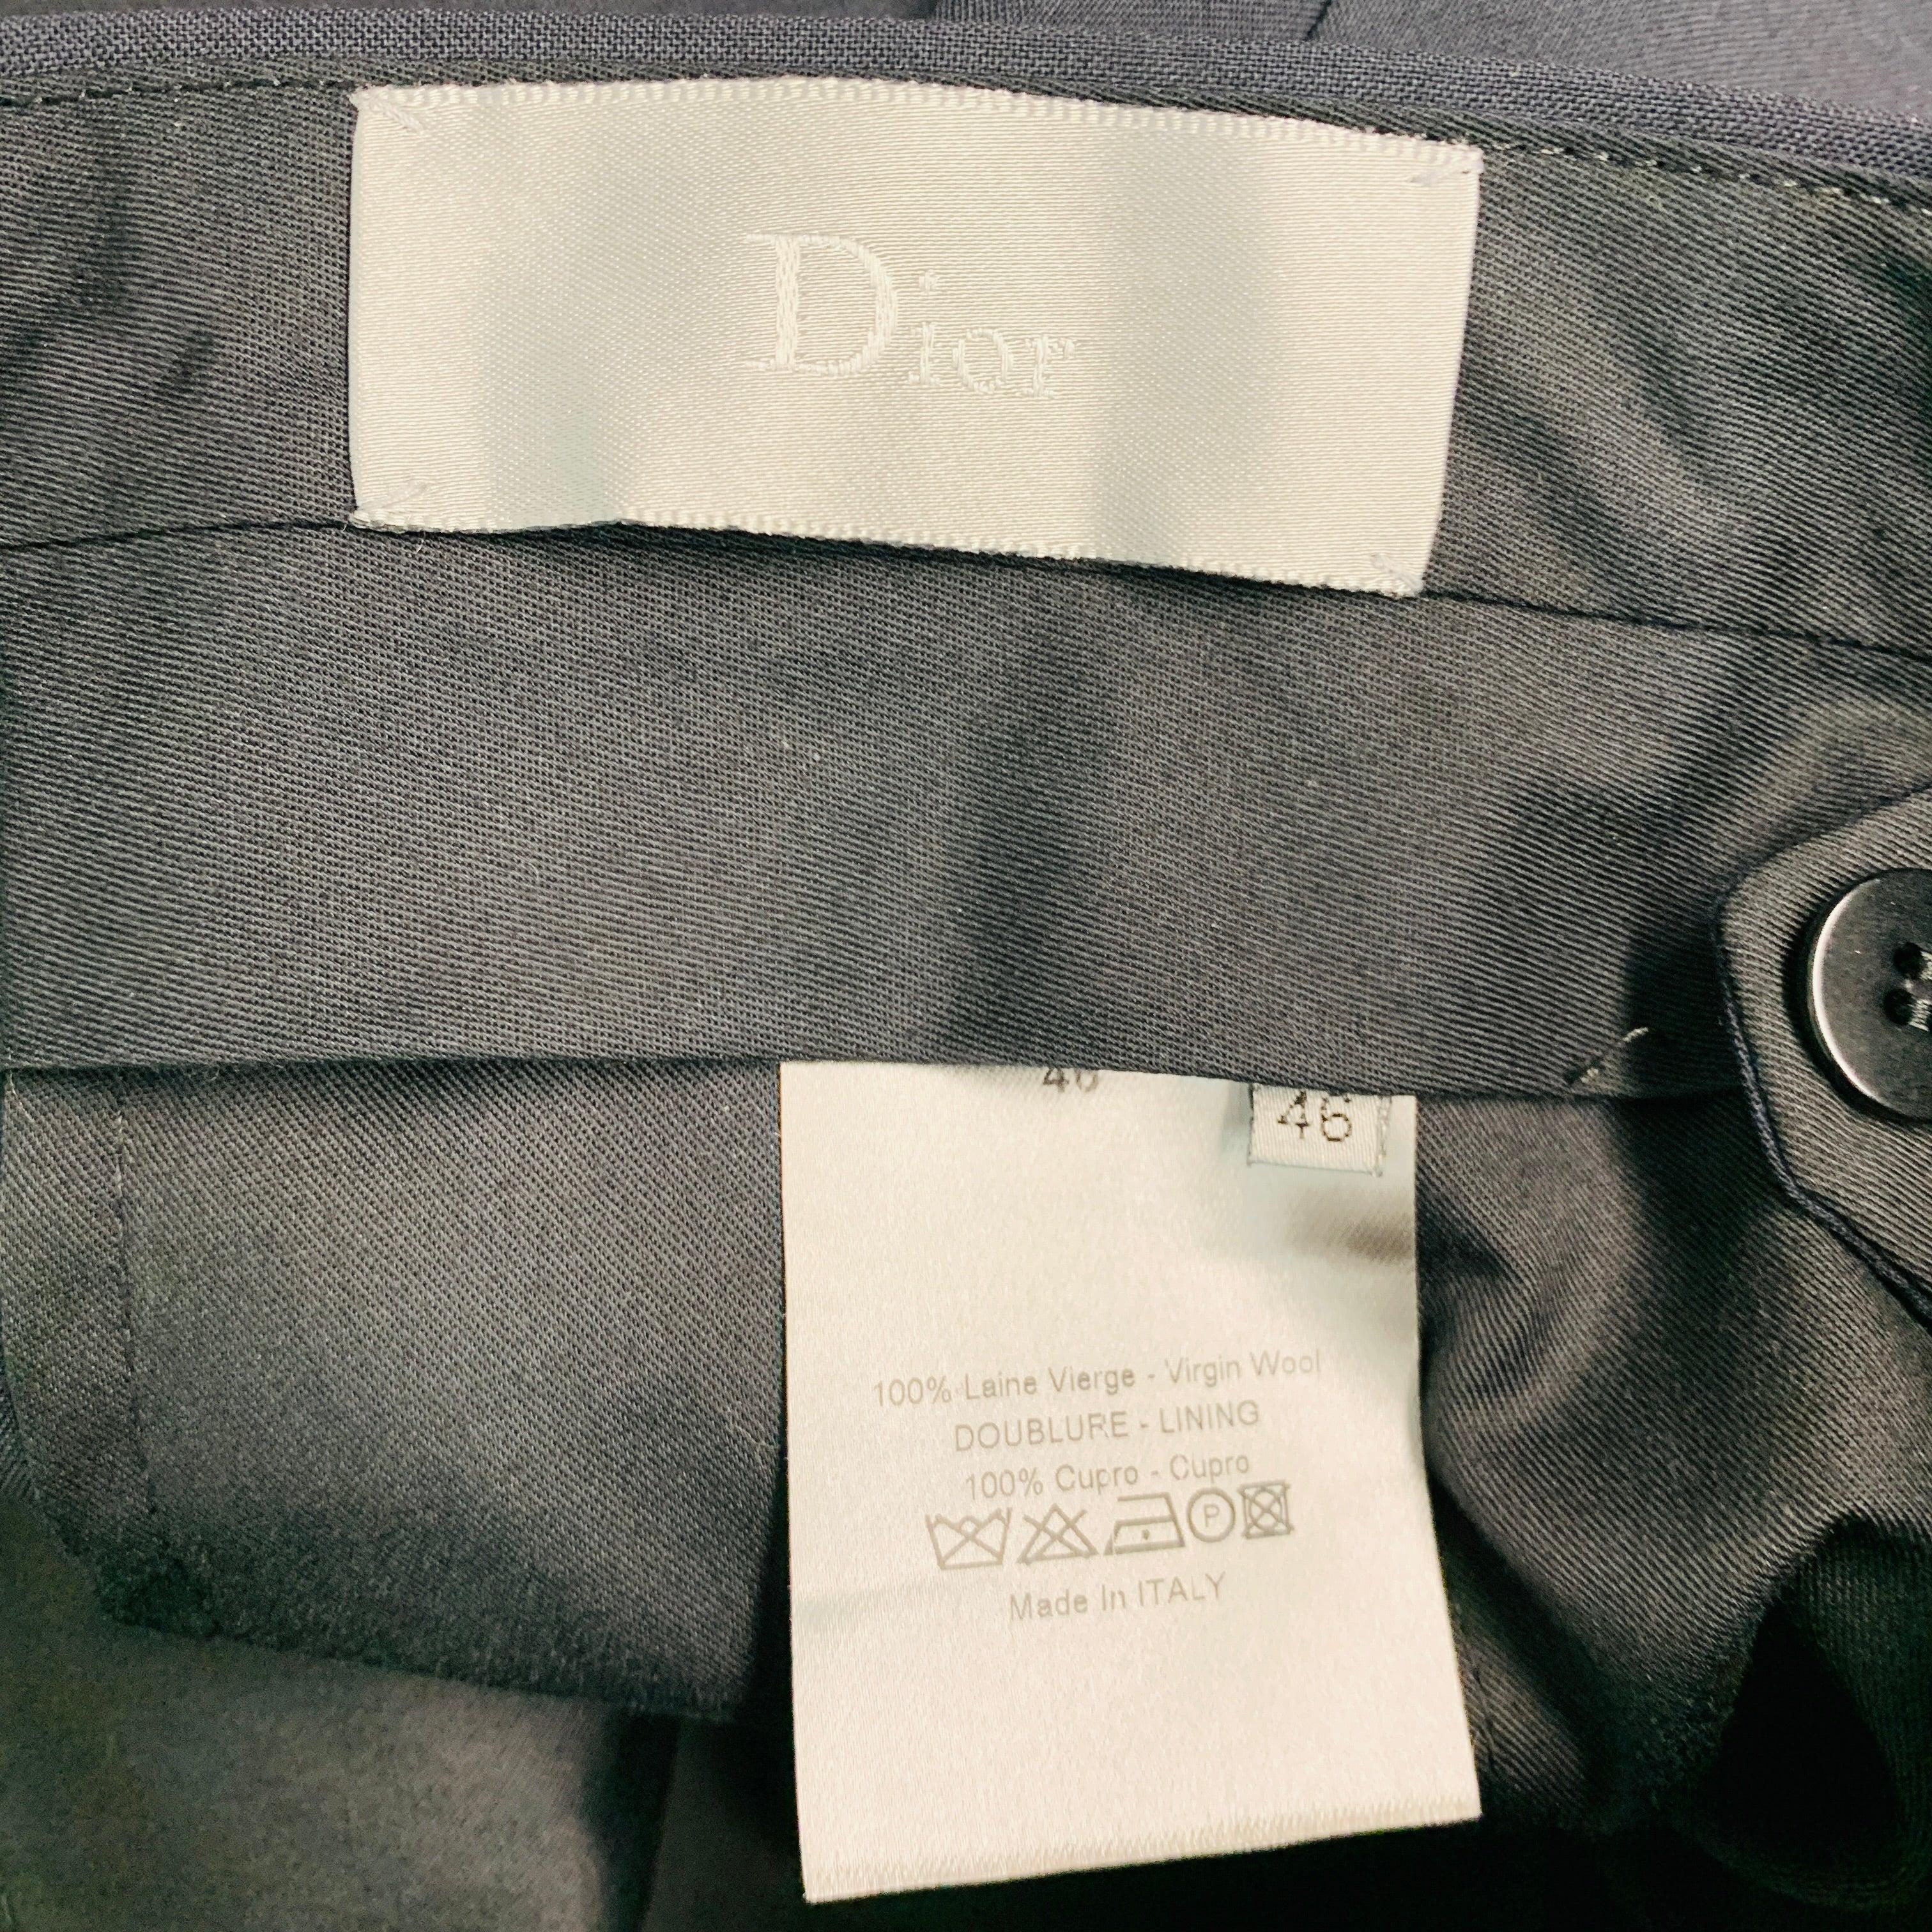 DIOR HOMME dress pants
in a
navy virgin wool fabric featuring flat front style, three pockets, and zip fly closure. This item is not hemmed, ready to be tailored to your perfect fit.New without Tags. 

Marked:   46 

Measurements: 
  Waist: 30